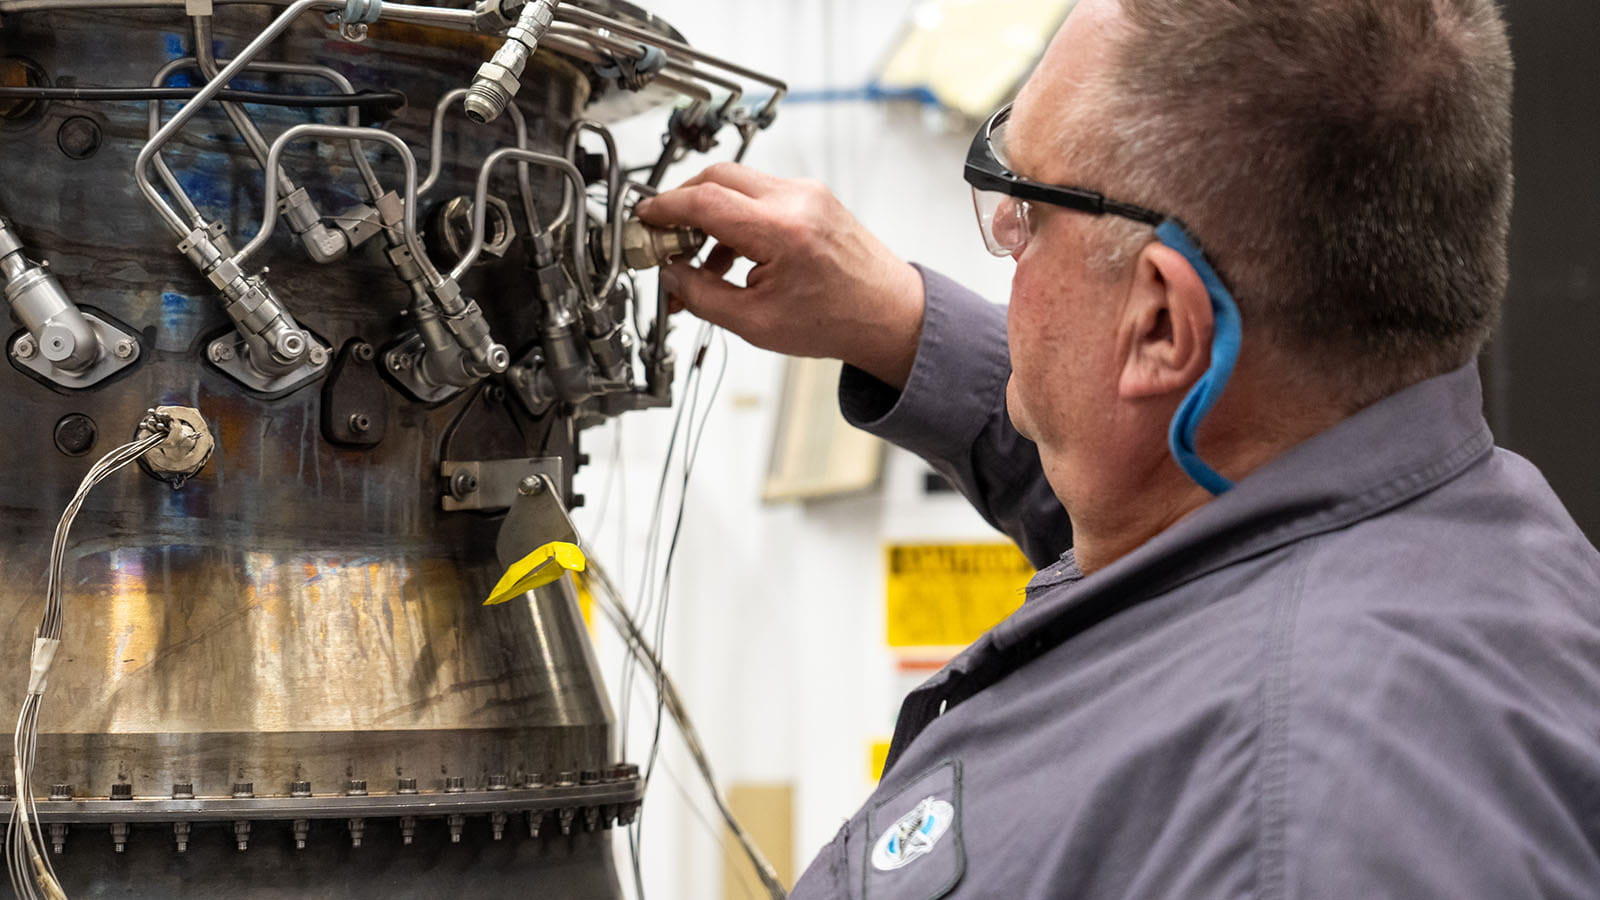 RTX's Pratt & Whitney collaborates with FAA to study non-CO2 emissions under FAA ASCENT program Tests will compare emissions from conventional Jet A and 100% SAF